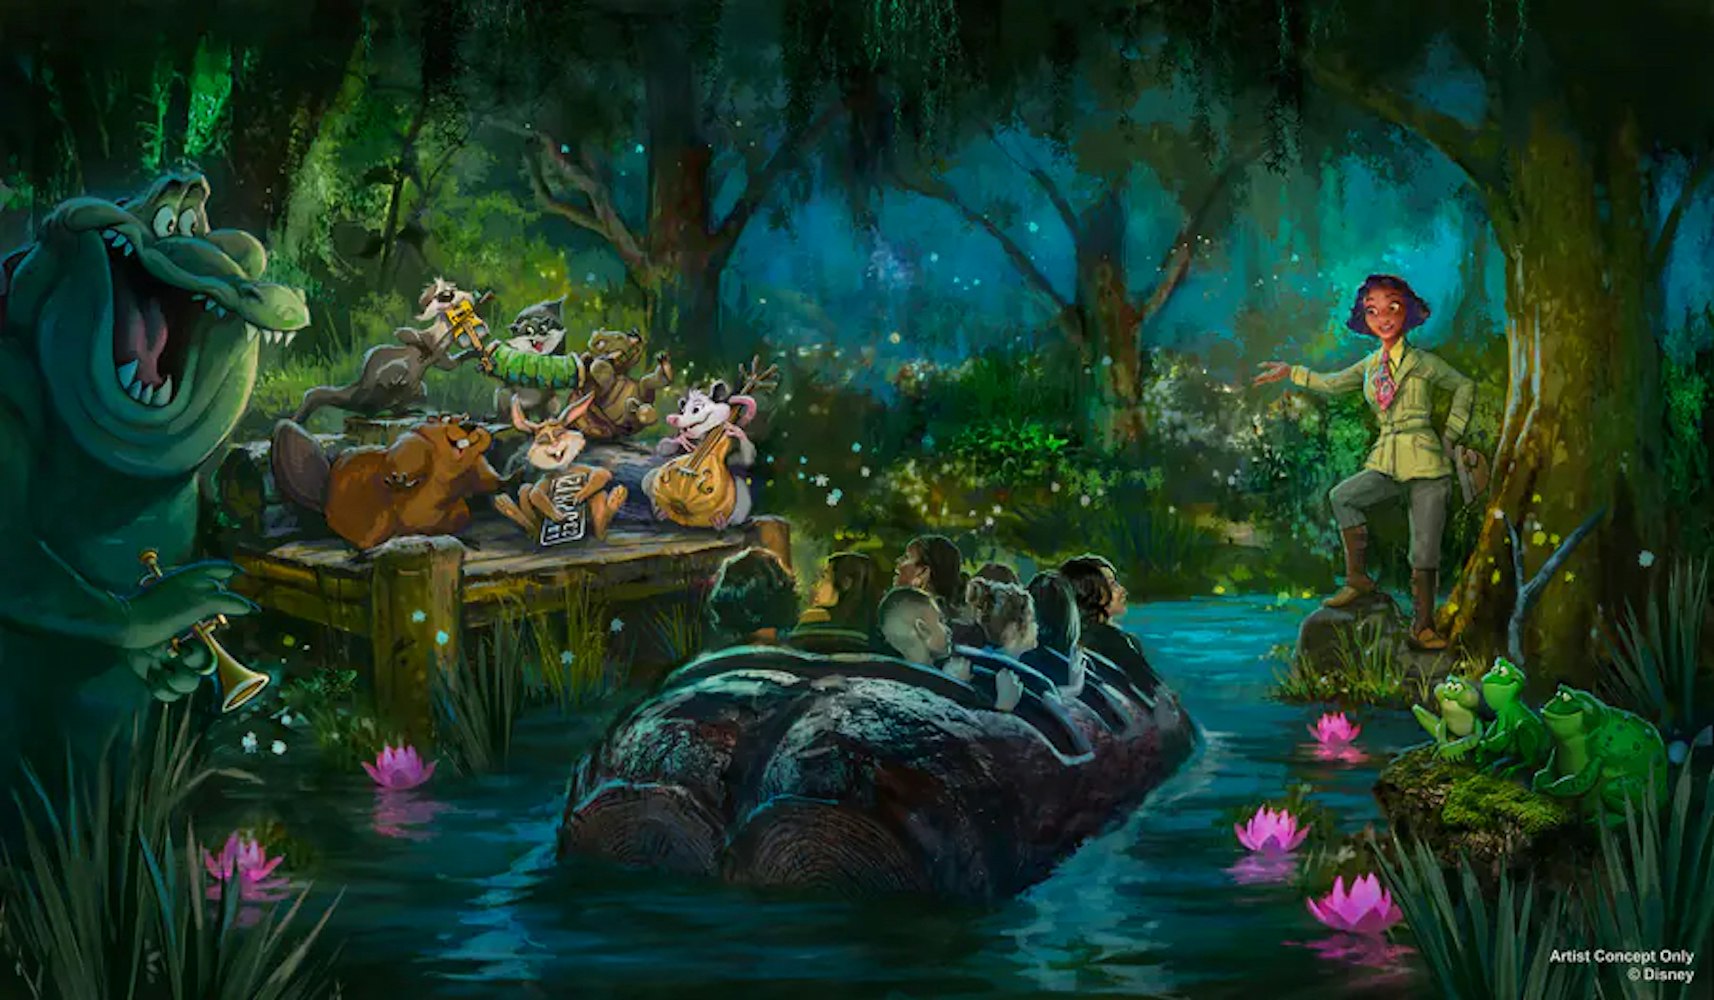 Cover Image for Tiana’s Bayou Adventure “Almost There” at Magic Kingdom Park